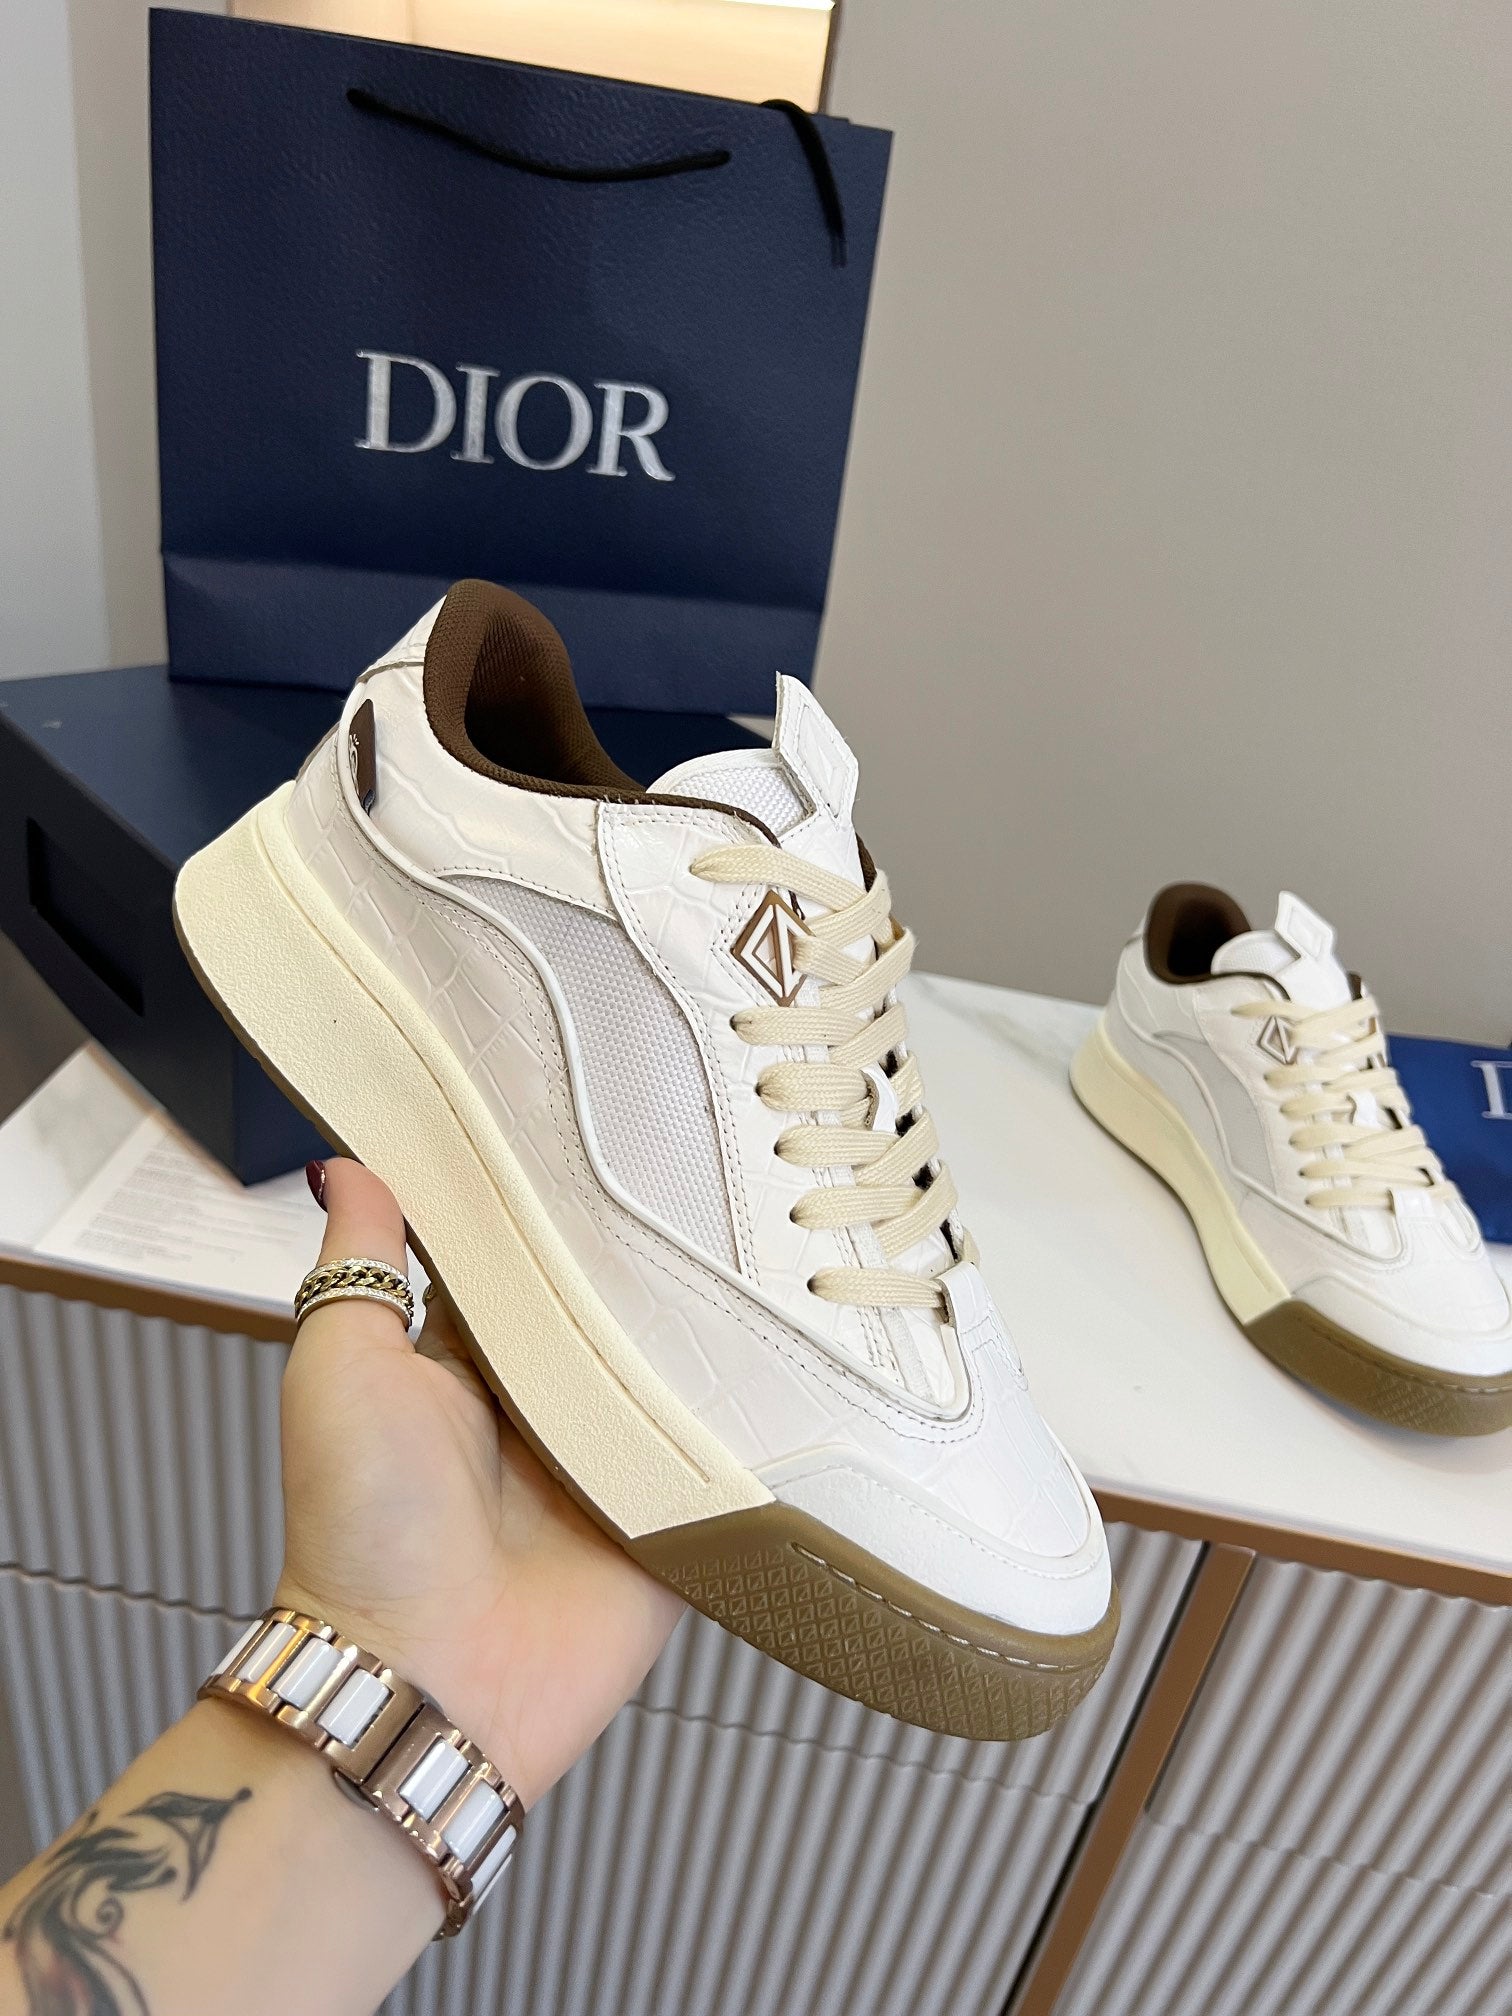 Christian Dior Fashion Casual Sneaker Shoes Y005